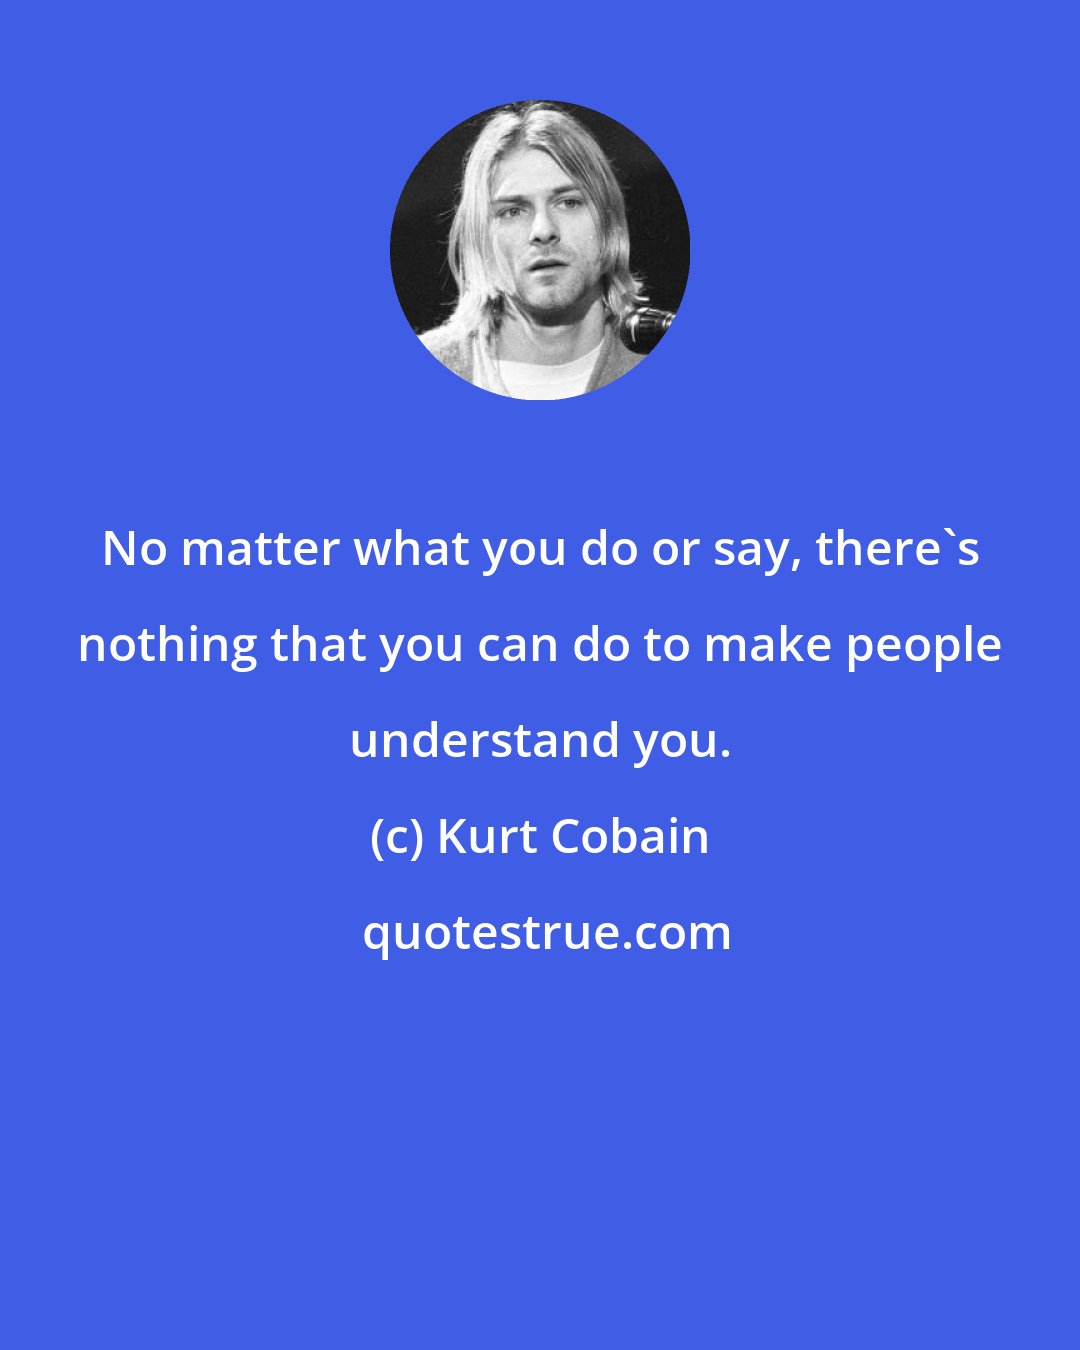 Kurt Cobain: No matter what you do or say, there's nothing that you can do to make people understand you.